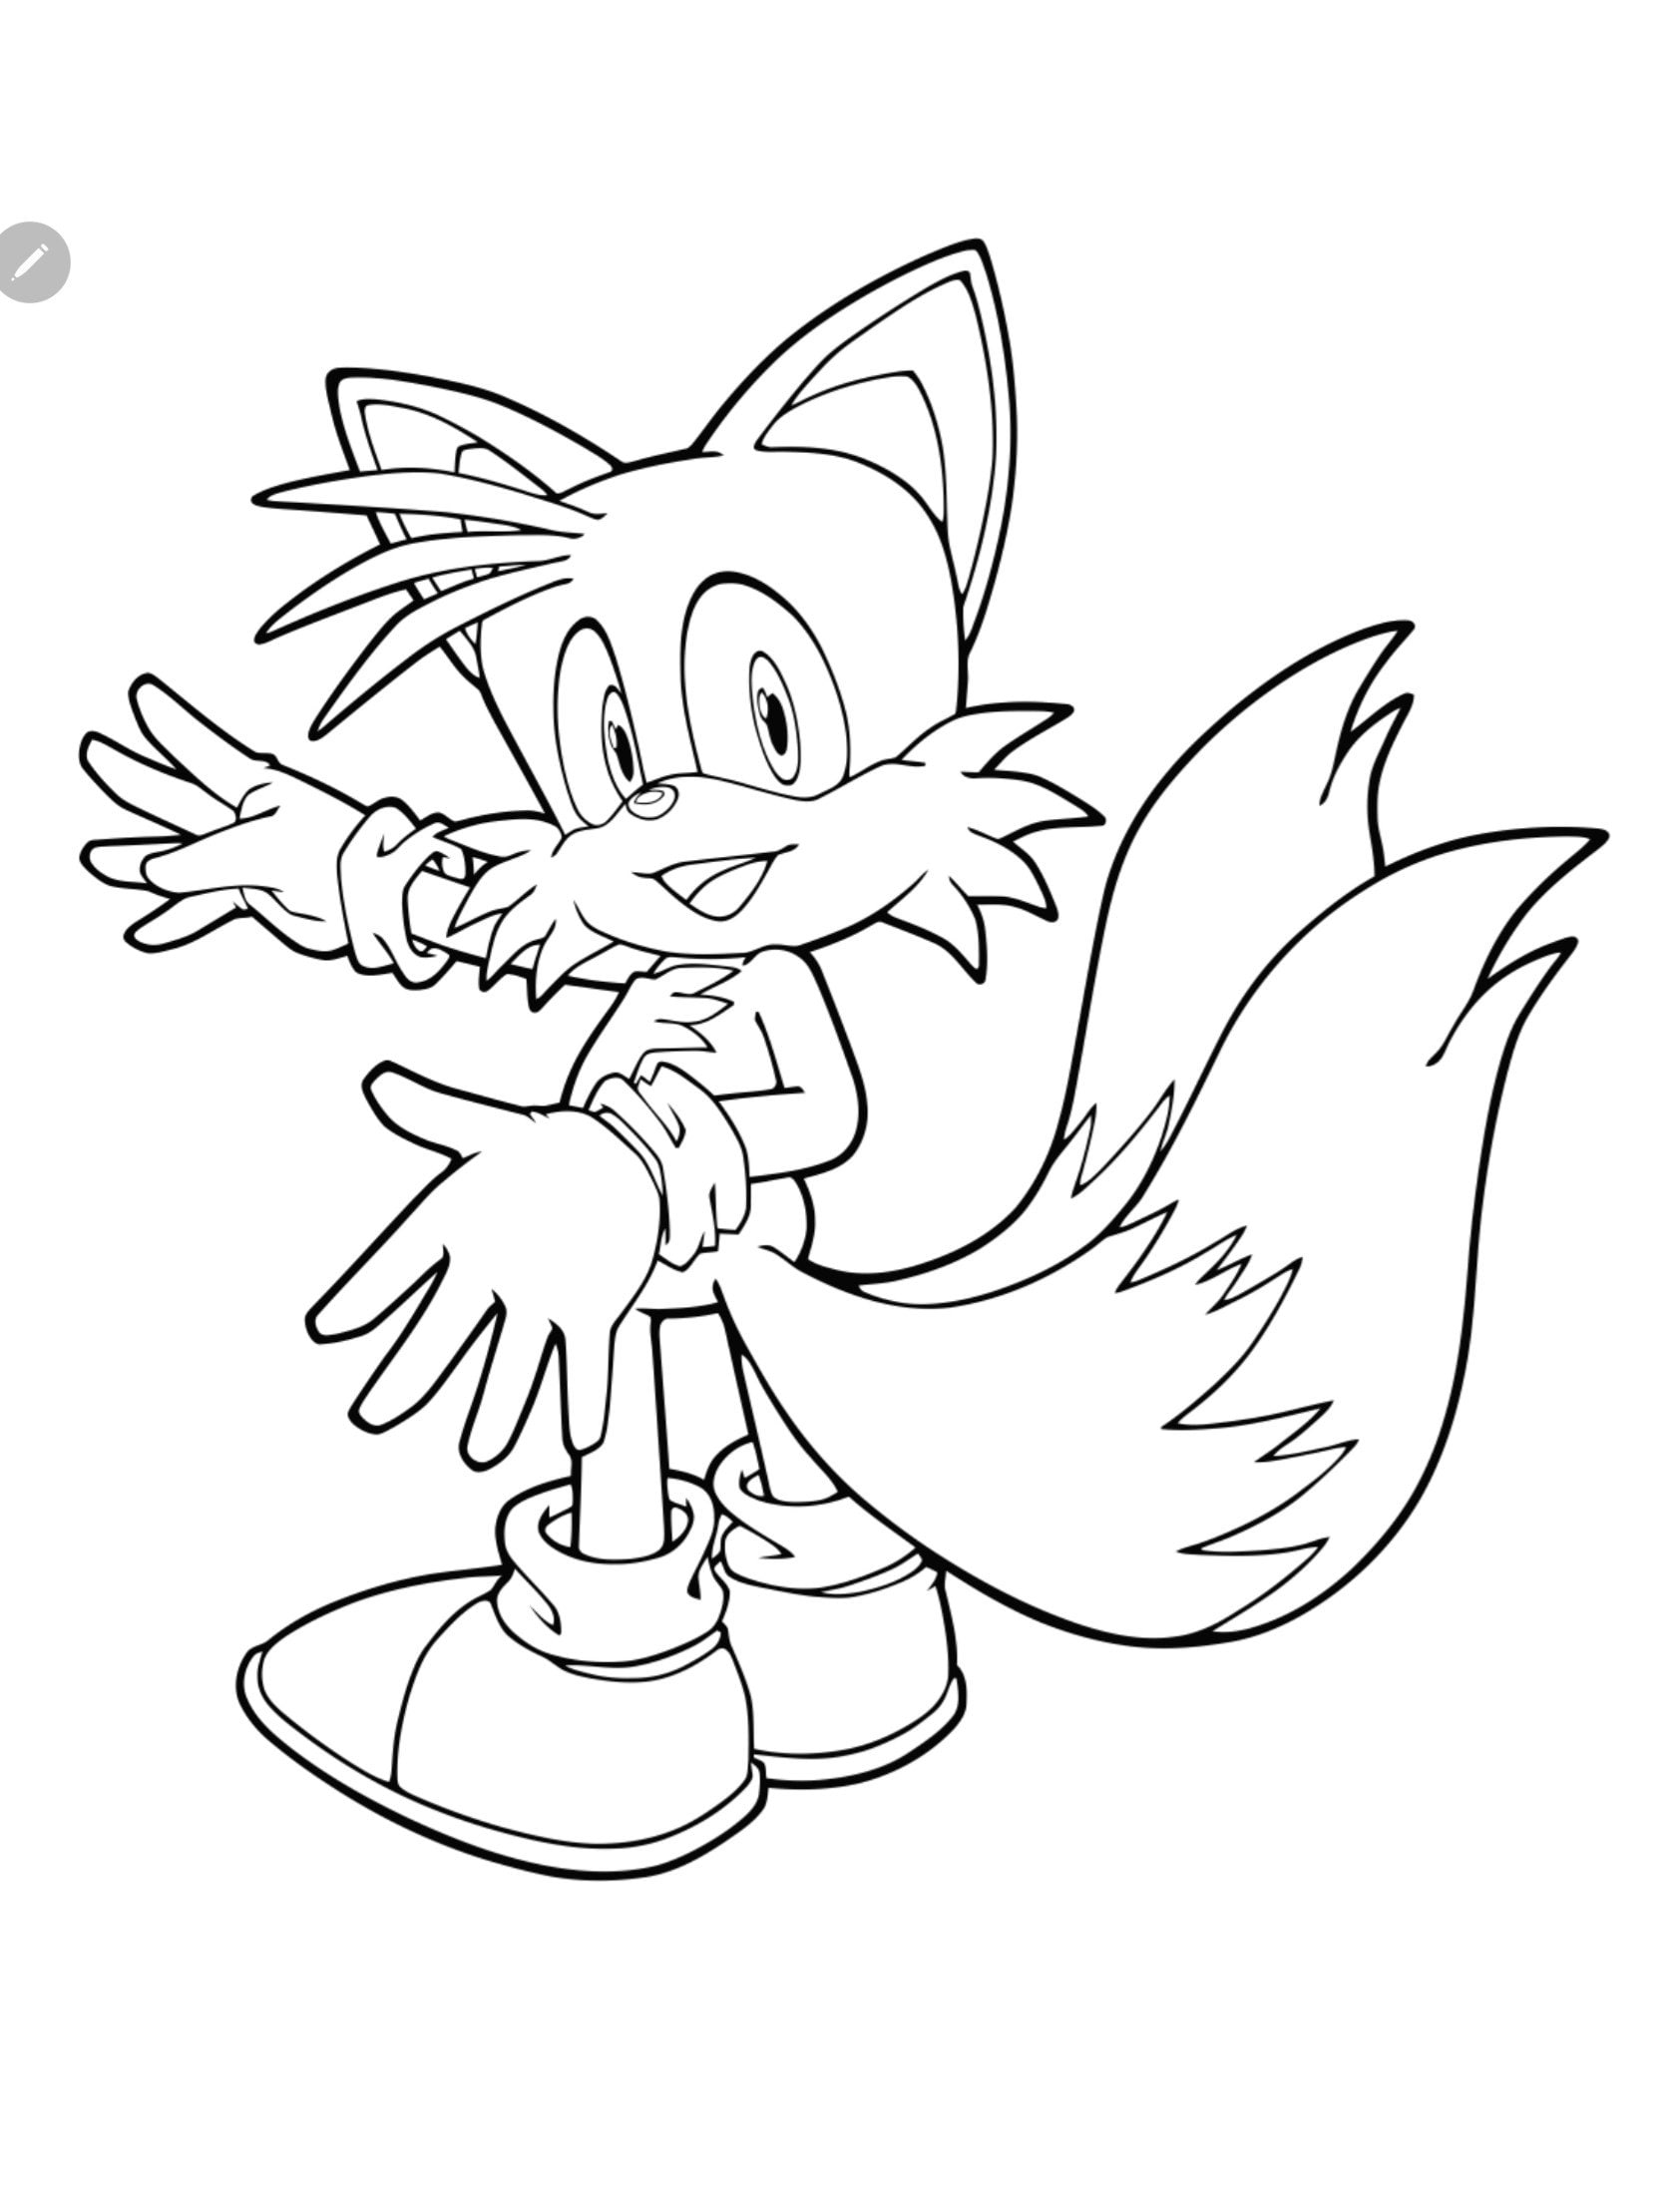 Sonic coloring pages pictures digital download